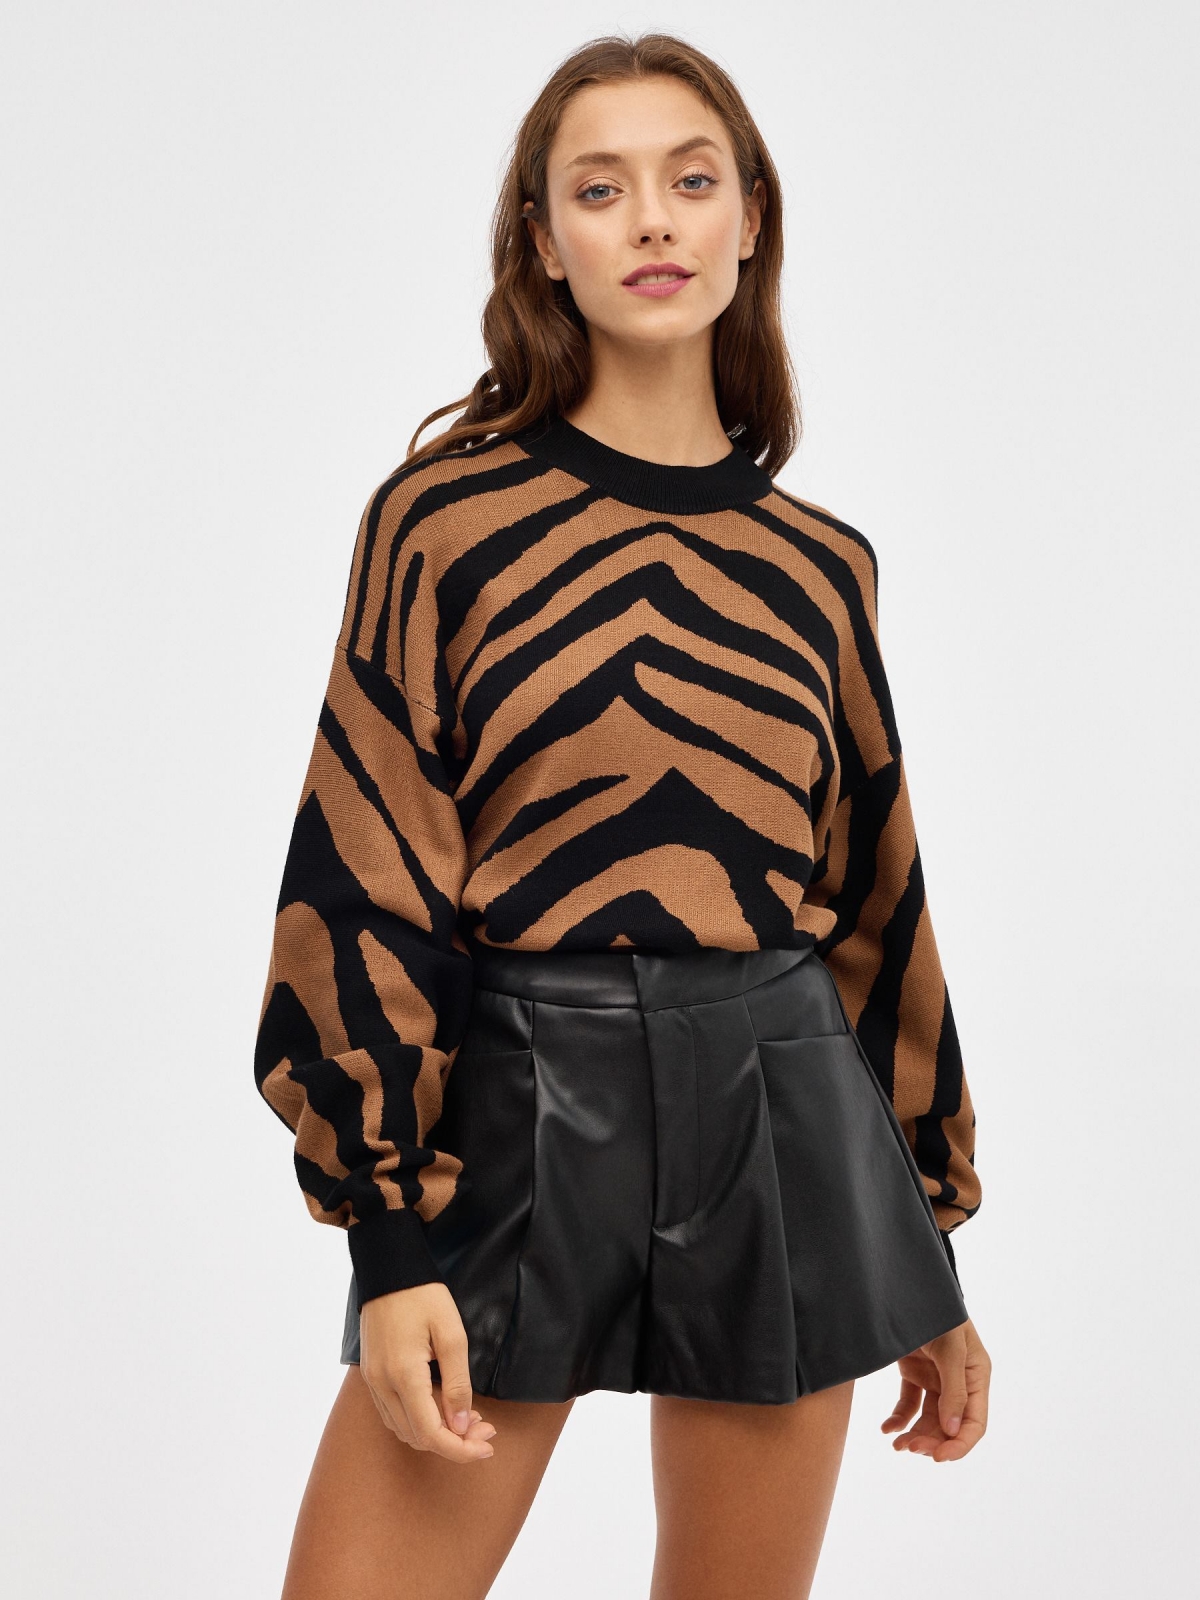 Animal print jacquard sweater brown middle front view